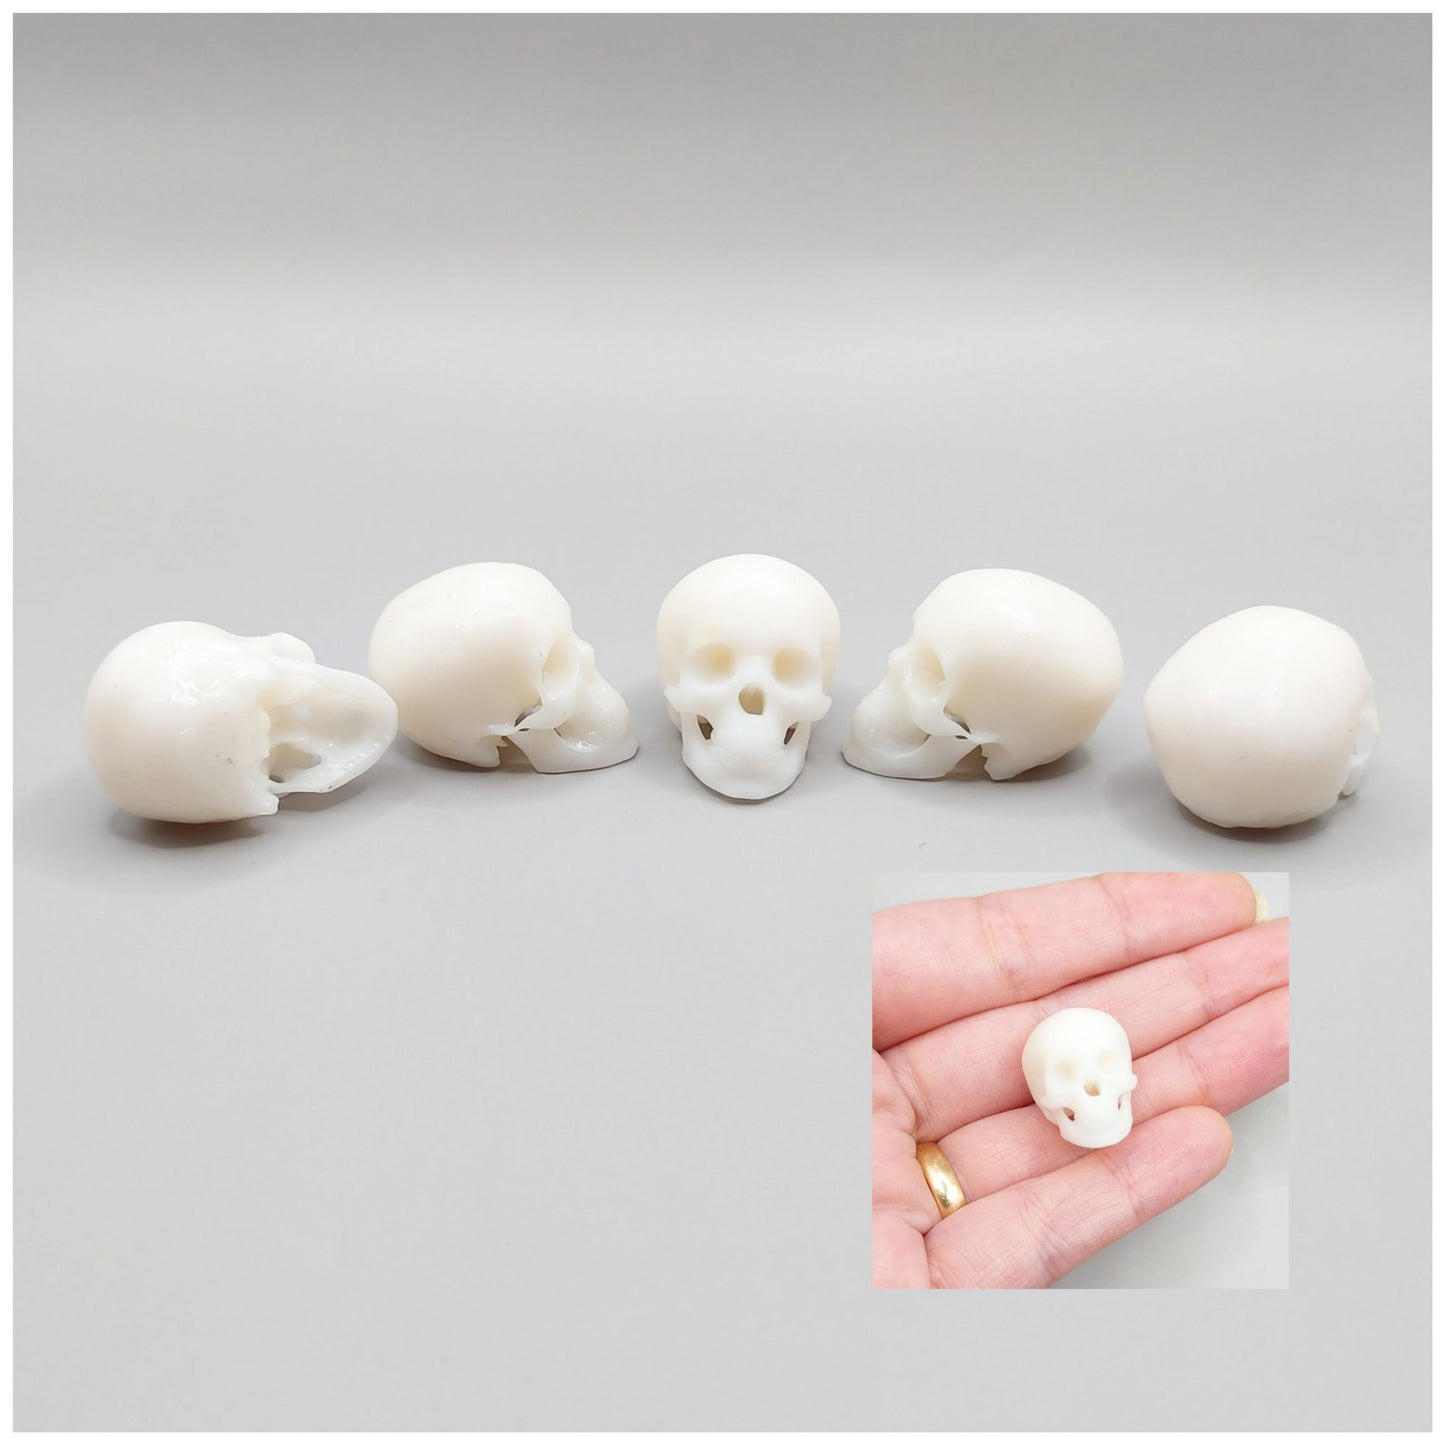 Human skulls in white 1:12 scale